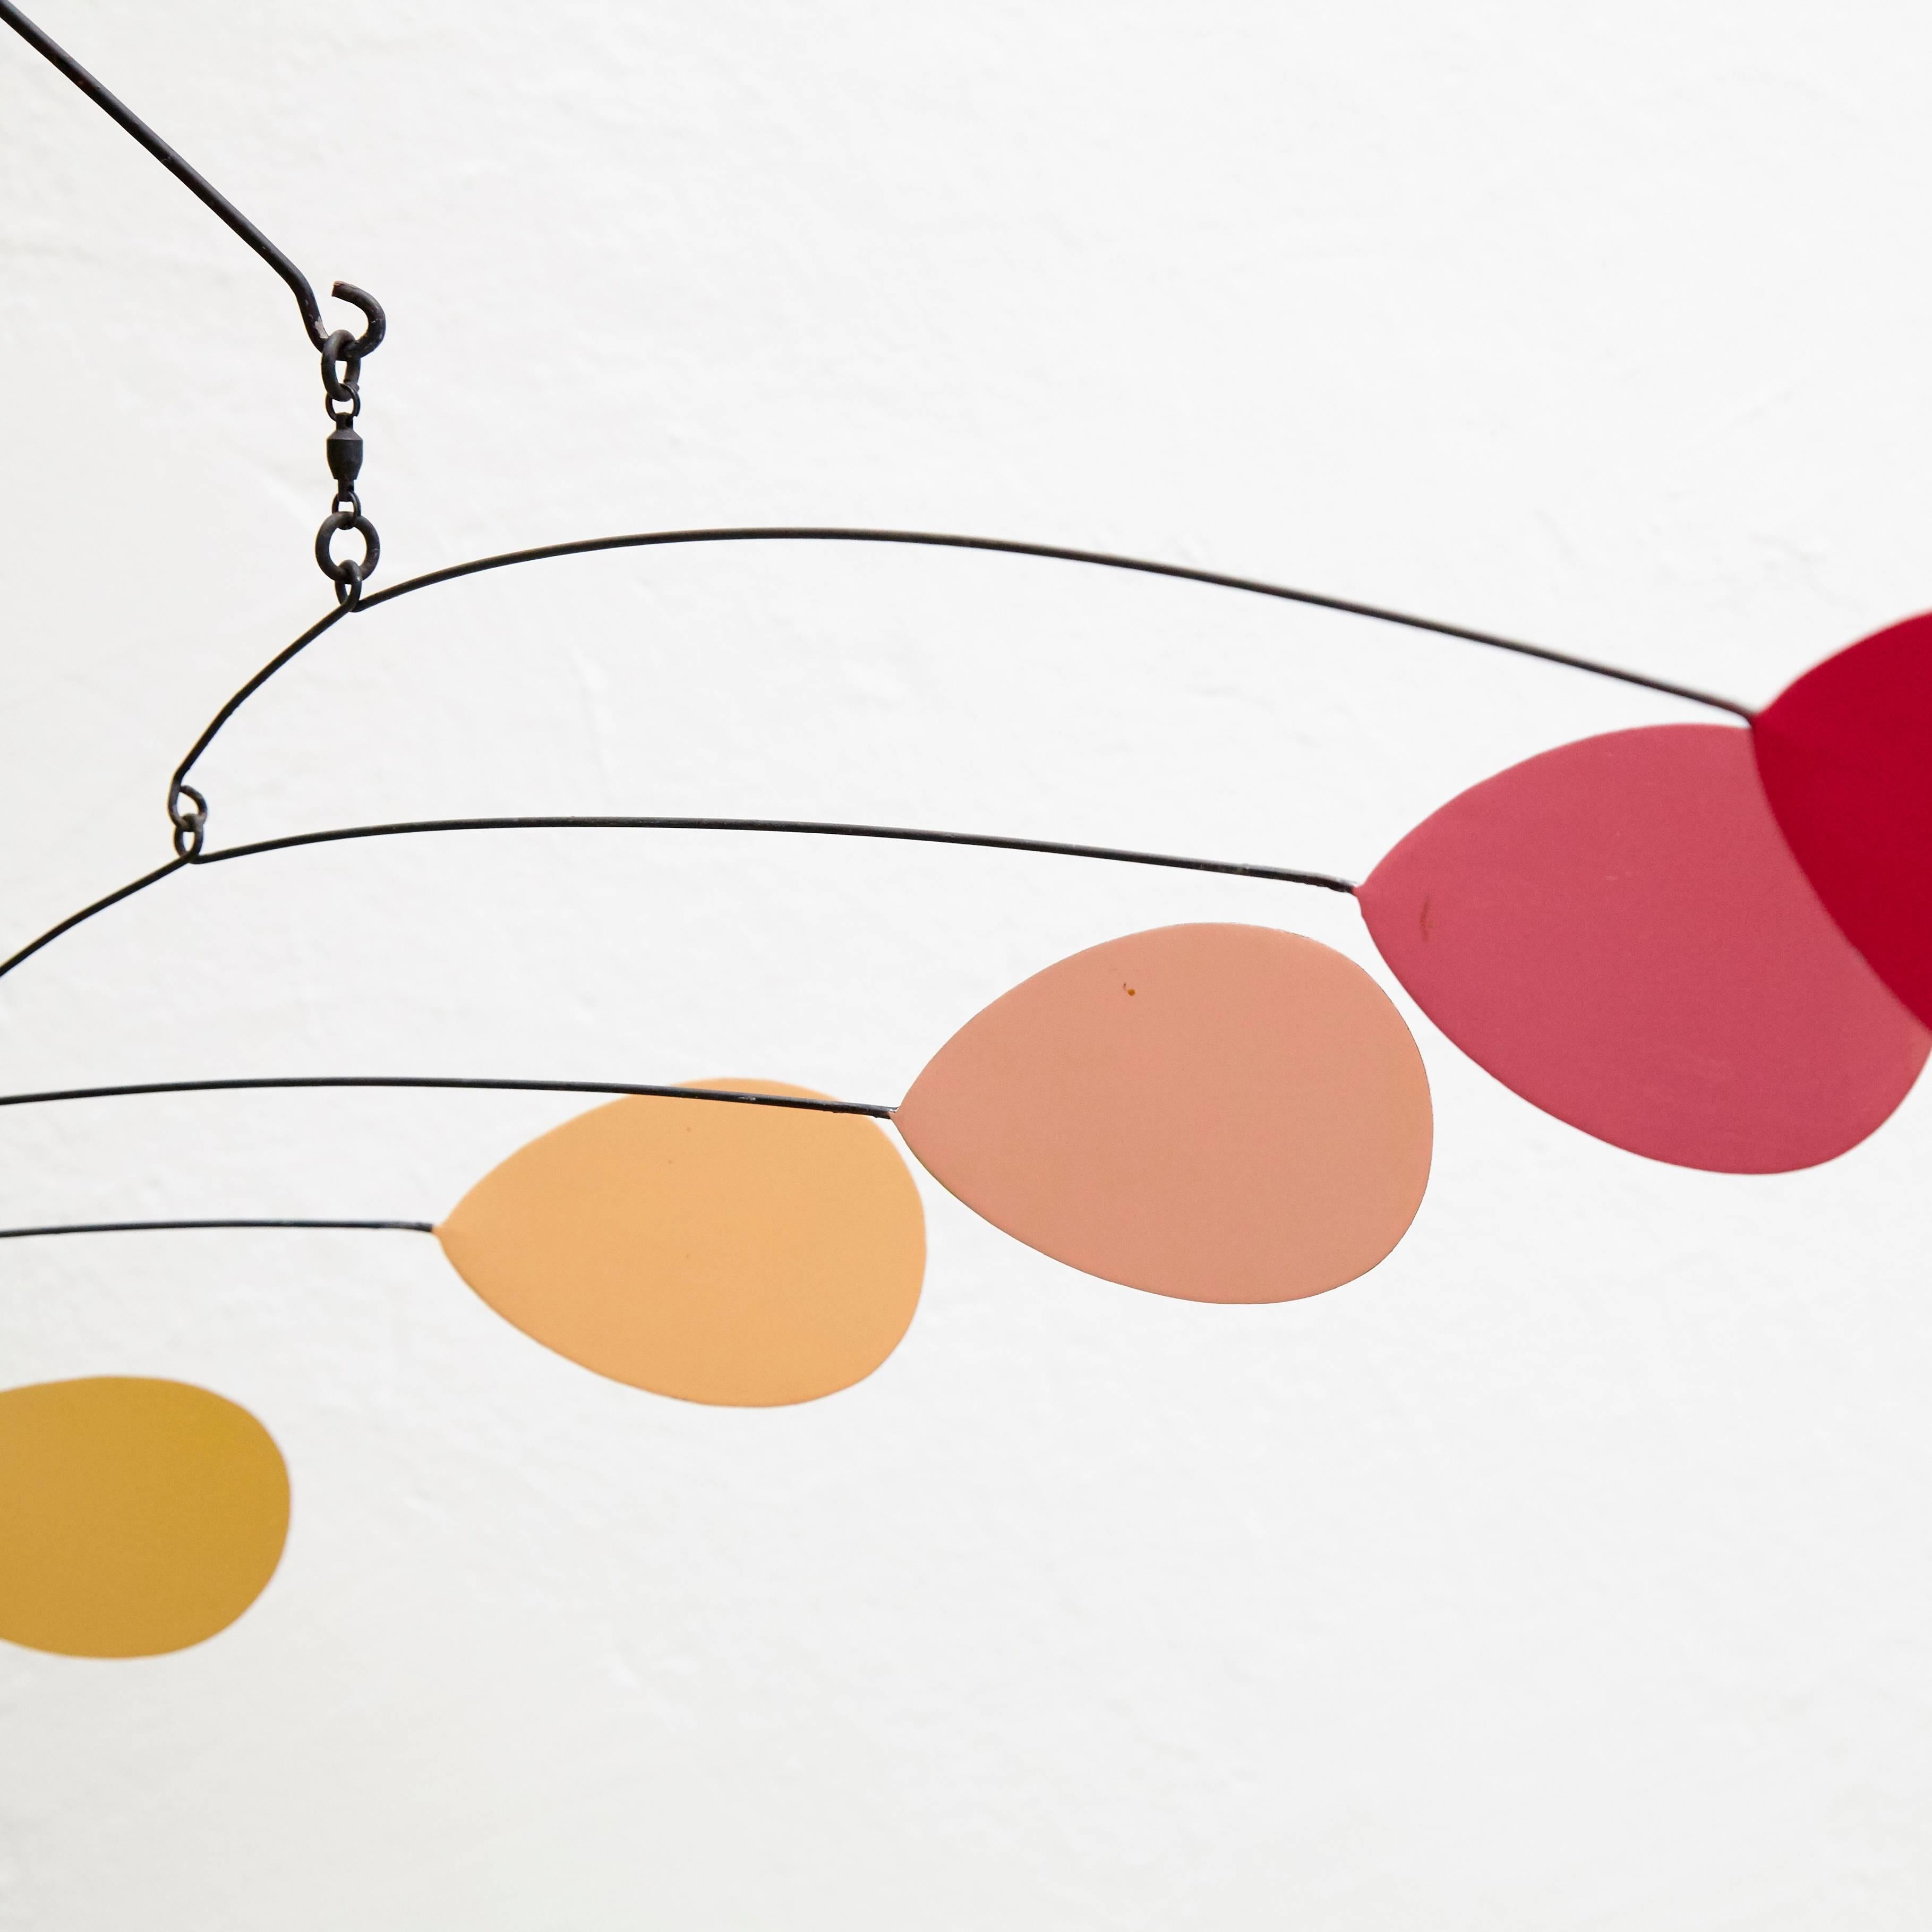 Late 20th Century Hanging Sculpture in the Style of Alexander Calder